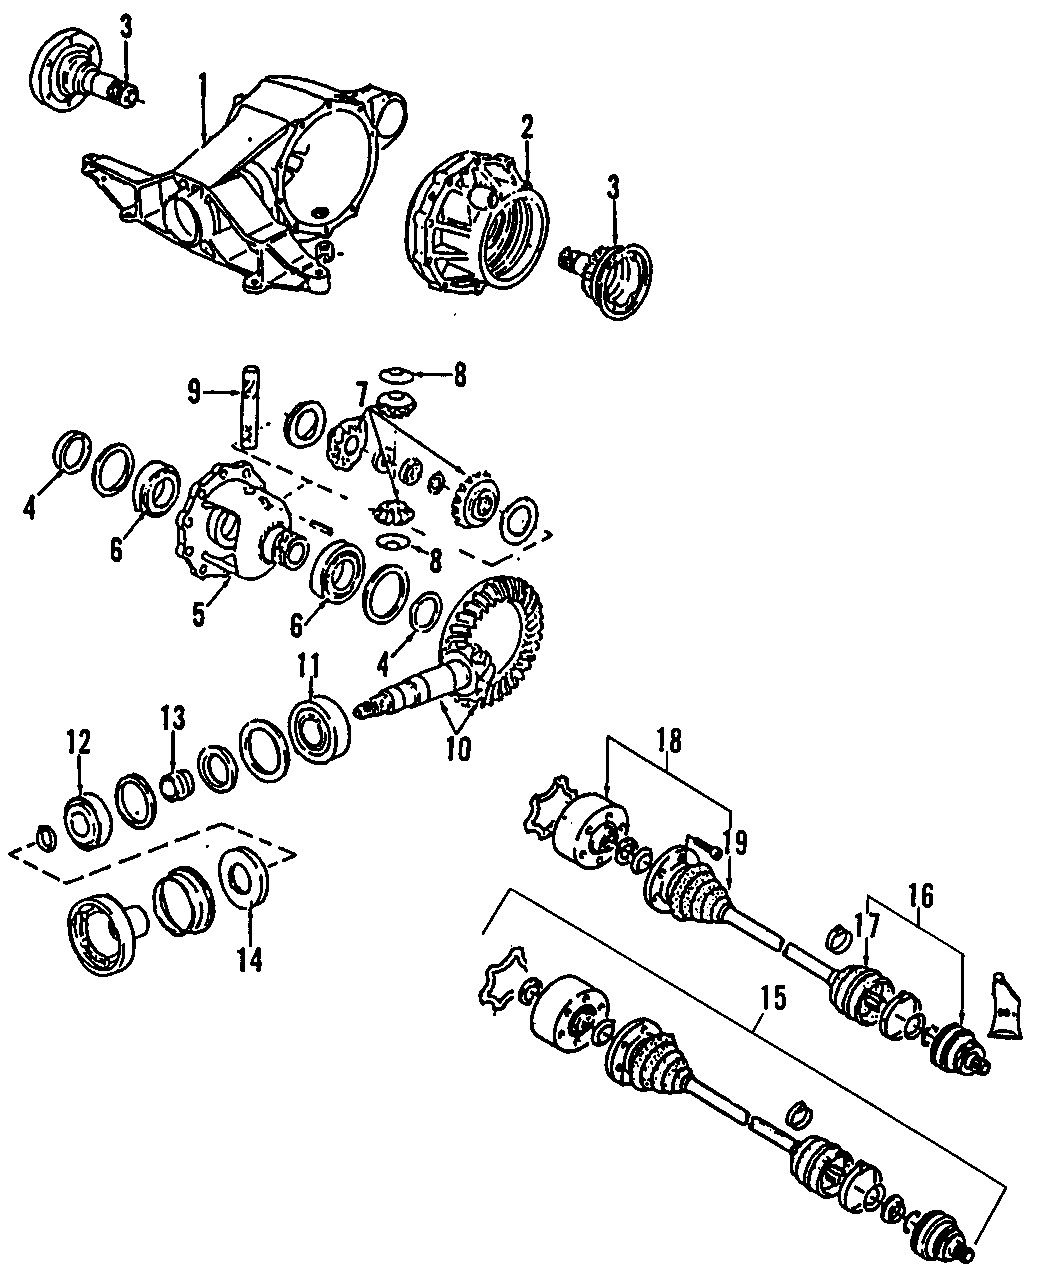 12DRIVE AXLES. REAR AXLE. AXLE SHAFTS & JOINTS. DIFFERENTIAL. PROPELLER SHAFT.https://images.simplepart.com/images/parts/motor/fullsize/F205080.png